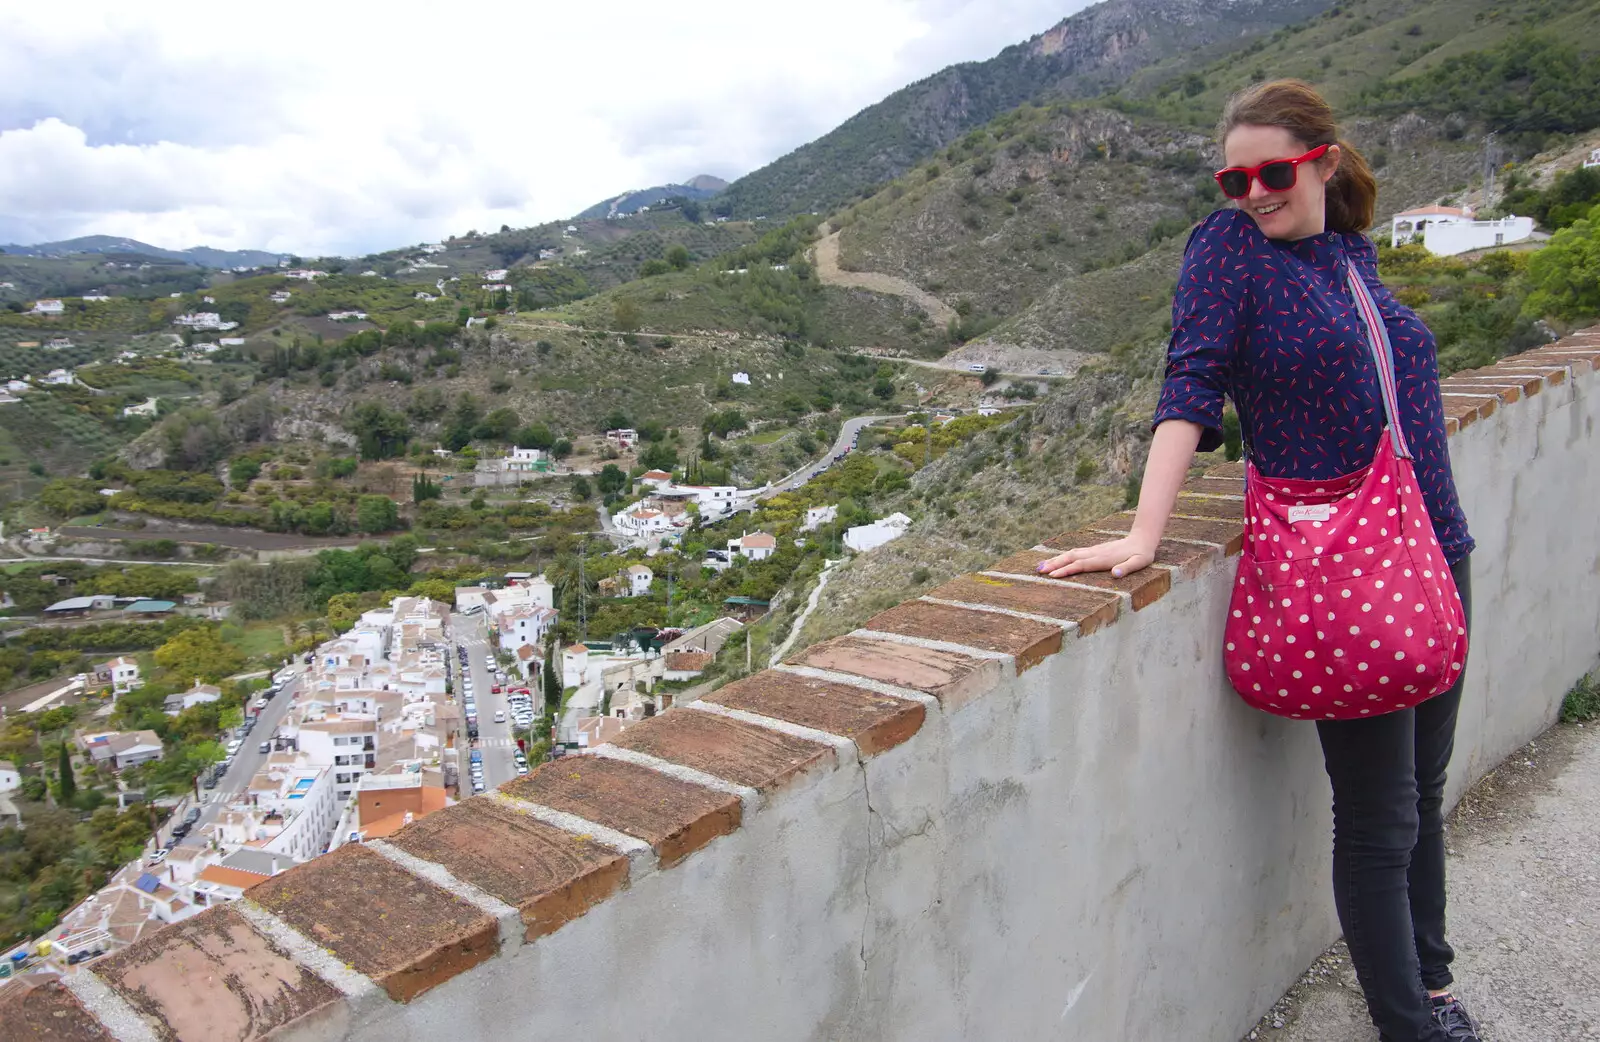 Isobel on a wall, two hundred metres above the town, from The Caves of Nerja, and Frigiliana, Andalusia, Spain - 18th April 2019